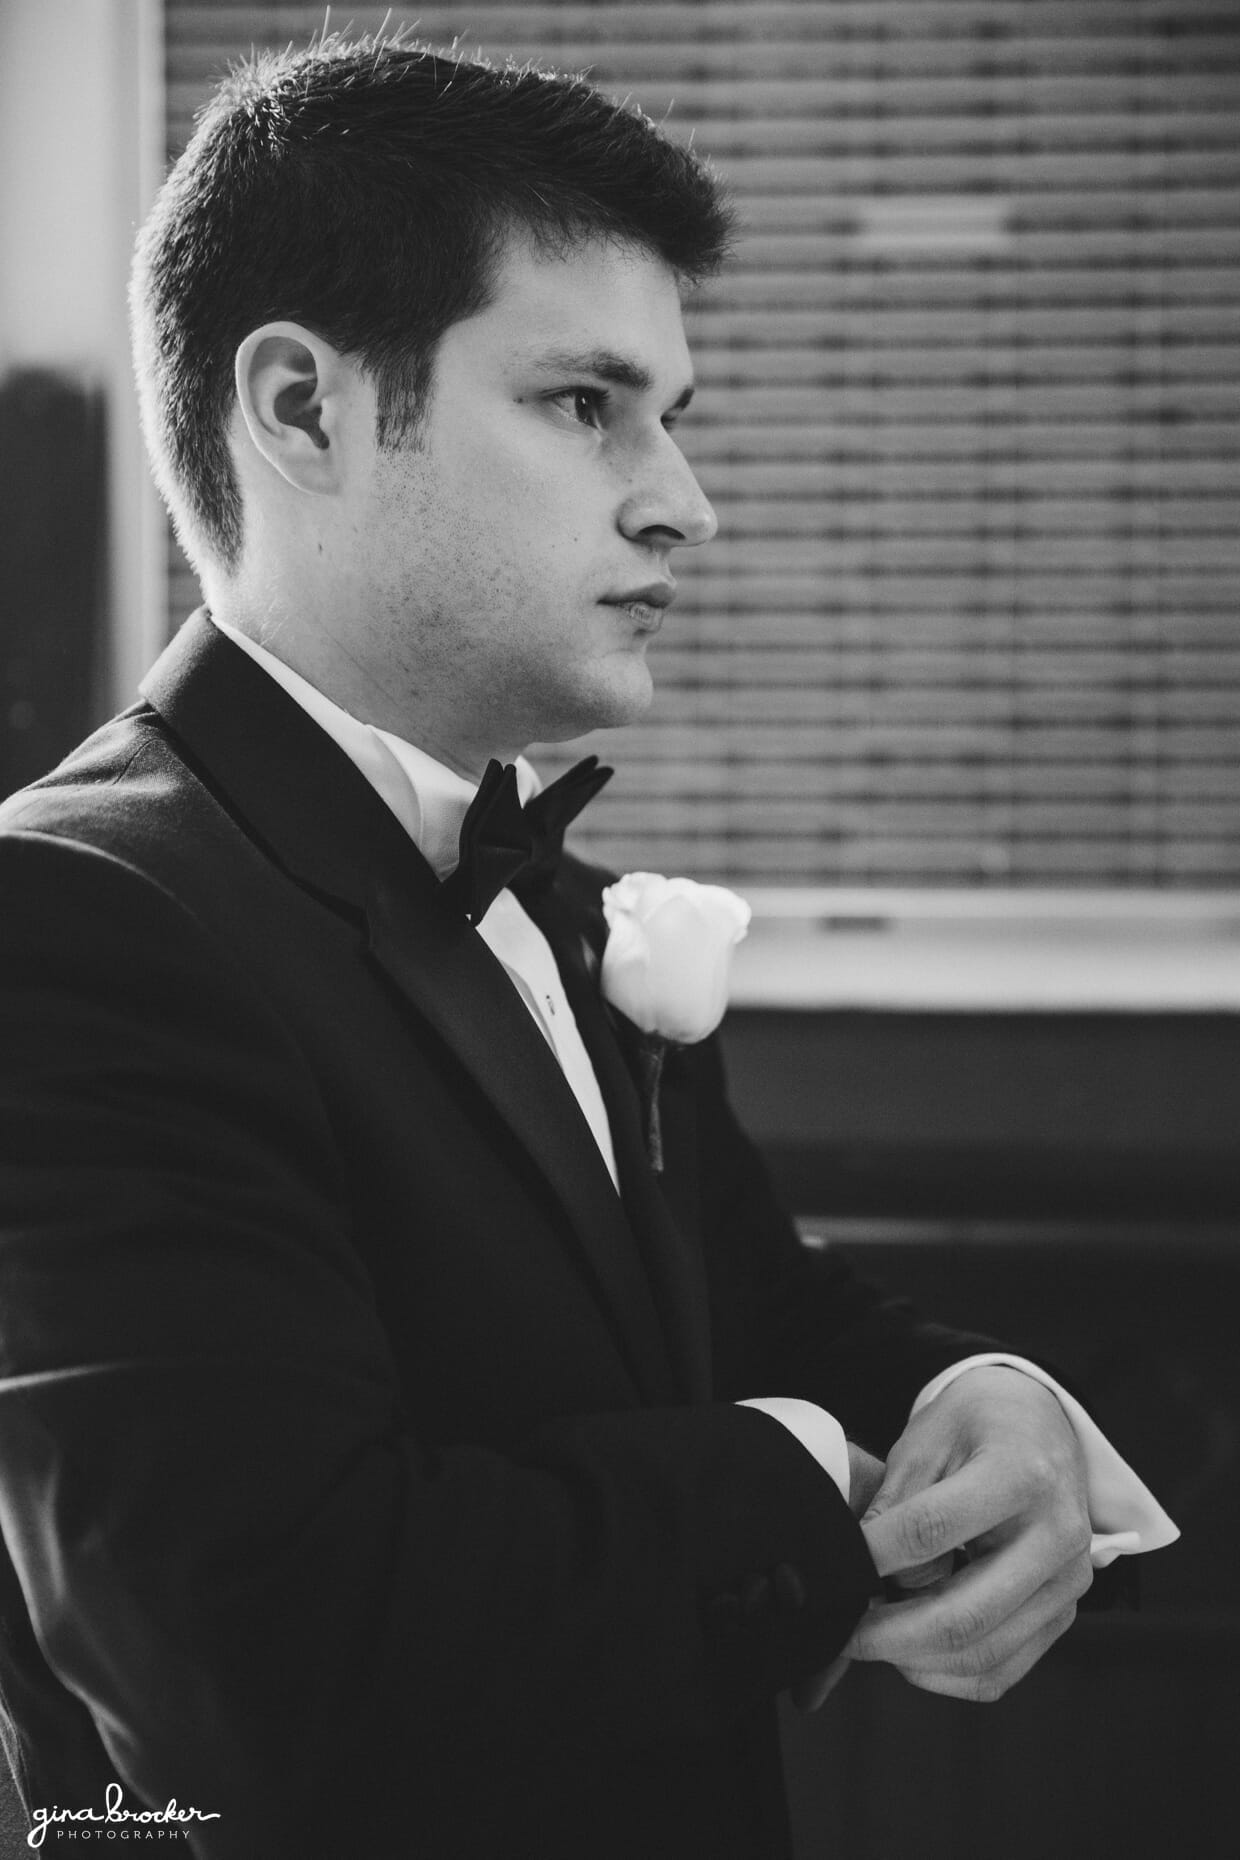 A portrait of groom fixing his cufflinks before his wedding ceremony in Salem, Massachusetts